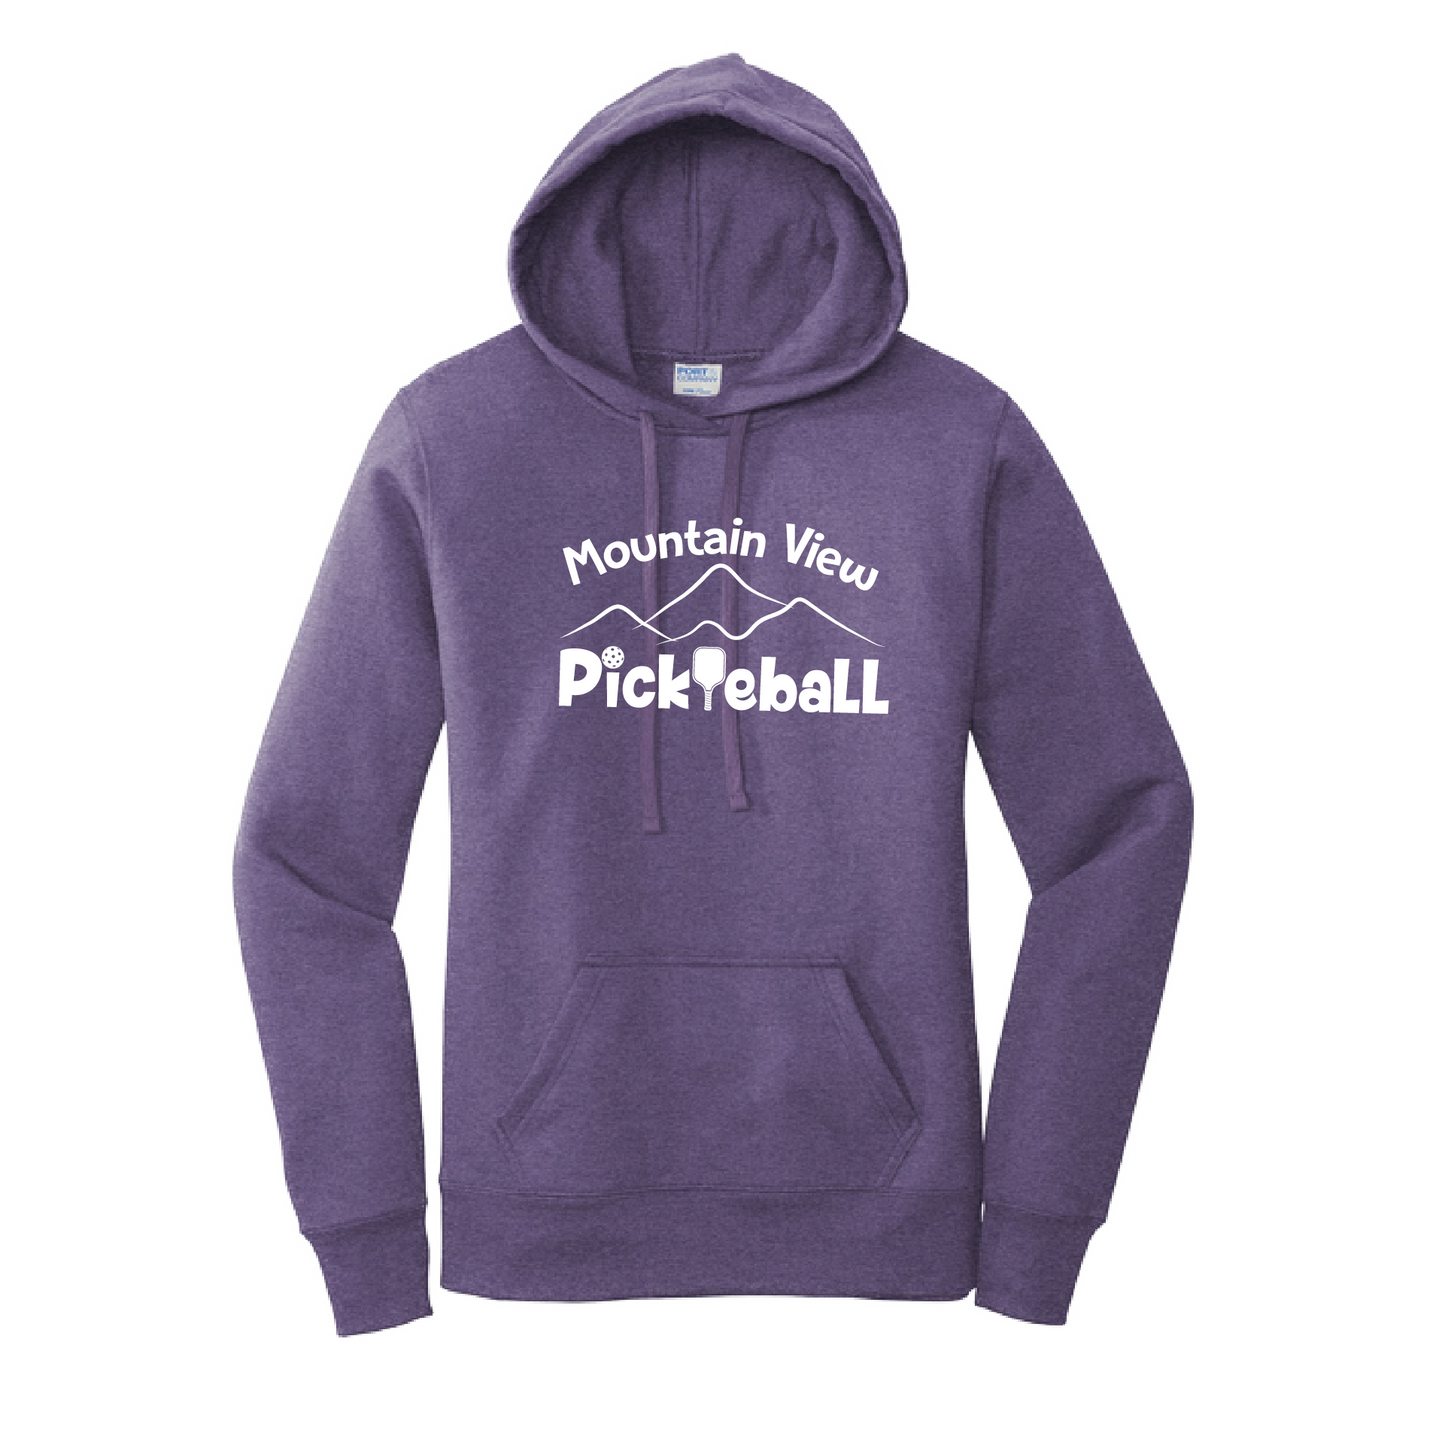 Pickleball Design: Mountain View Pickleball  Women's Hooded pullover Sweatshirt  Turn up the volume in this Women's Sweatshirts with its perfect mix of softness and attitude. Ultra soft lined inside with a lined hood also. This is fitted nicely for a women's figure. Front pouch pocket.